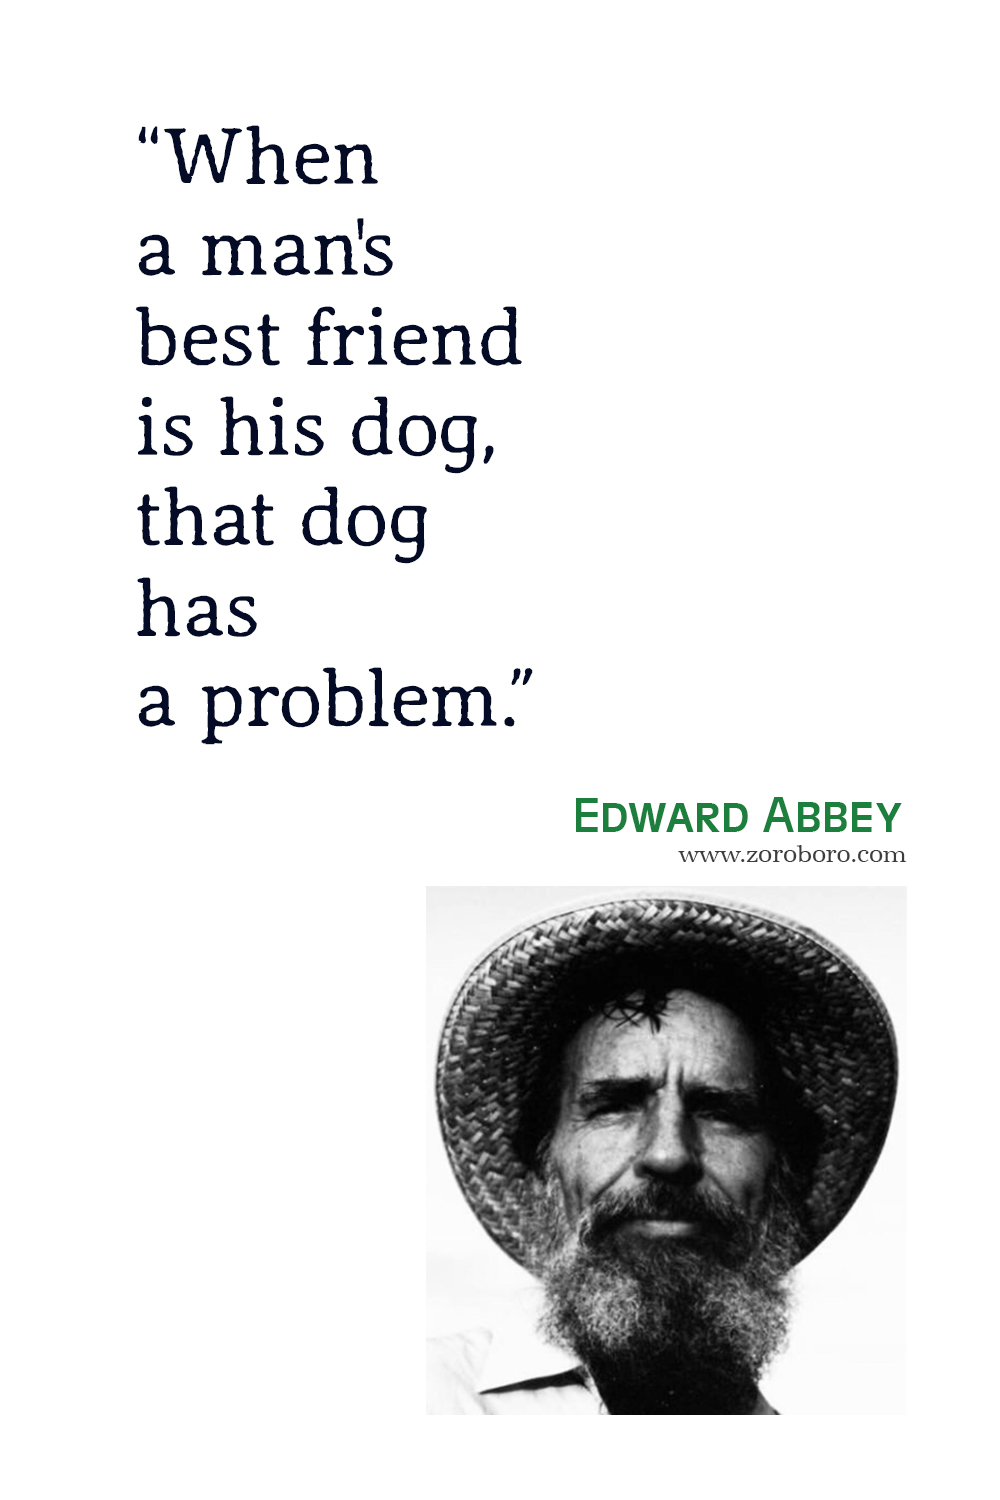 Edward Abbey Quotes, Edward Abbey Desert Solitaire: A Season in the Wilderness Quotes, Edward Abbey Environmentalist, Edward Abbey Books Quotes